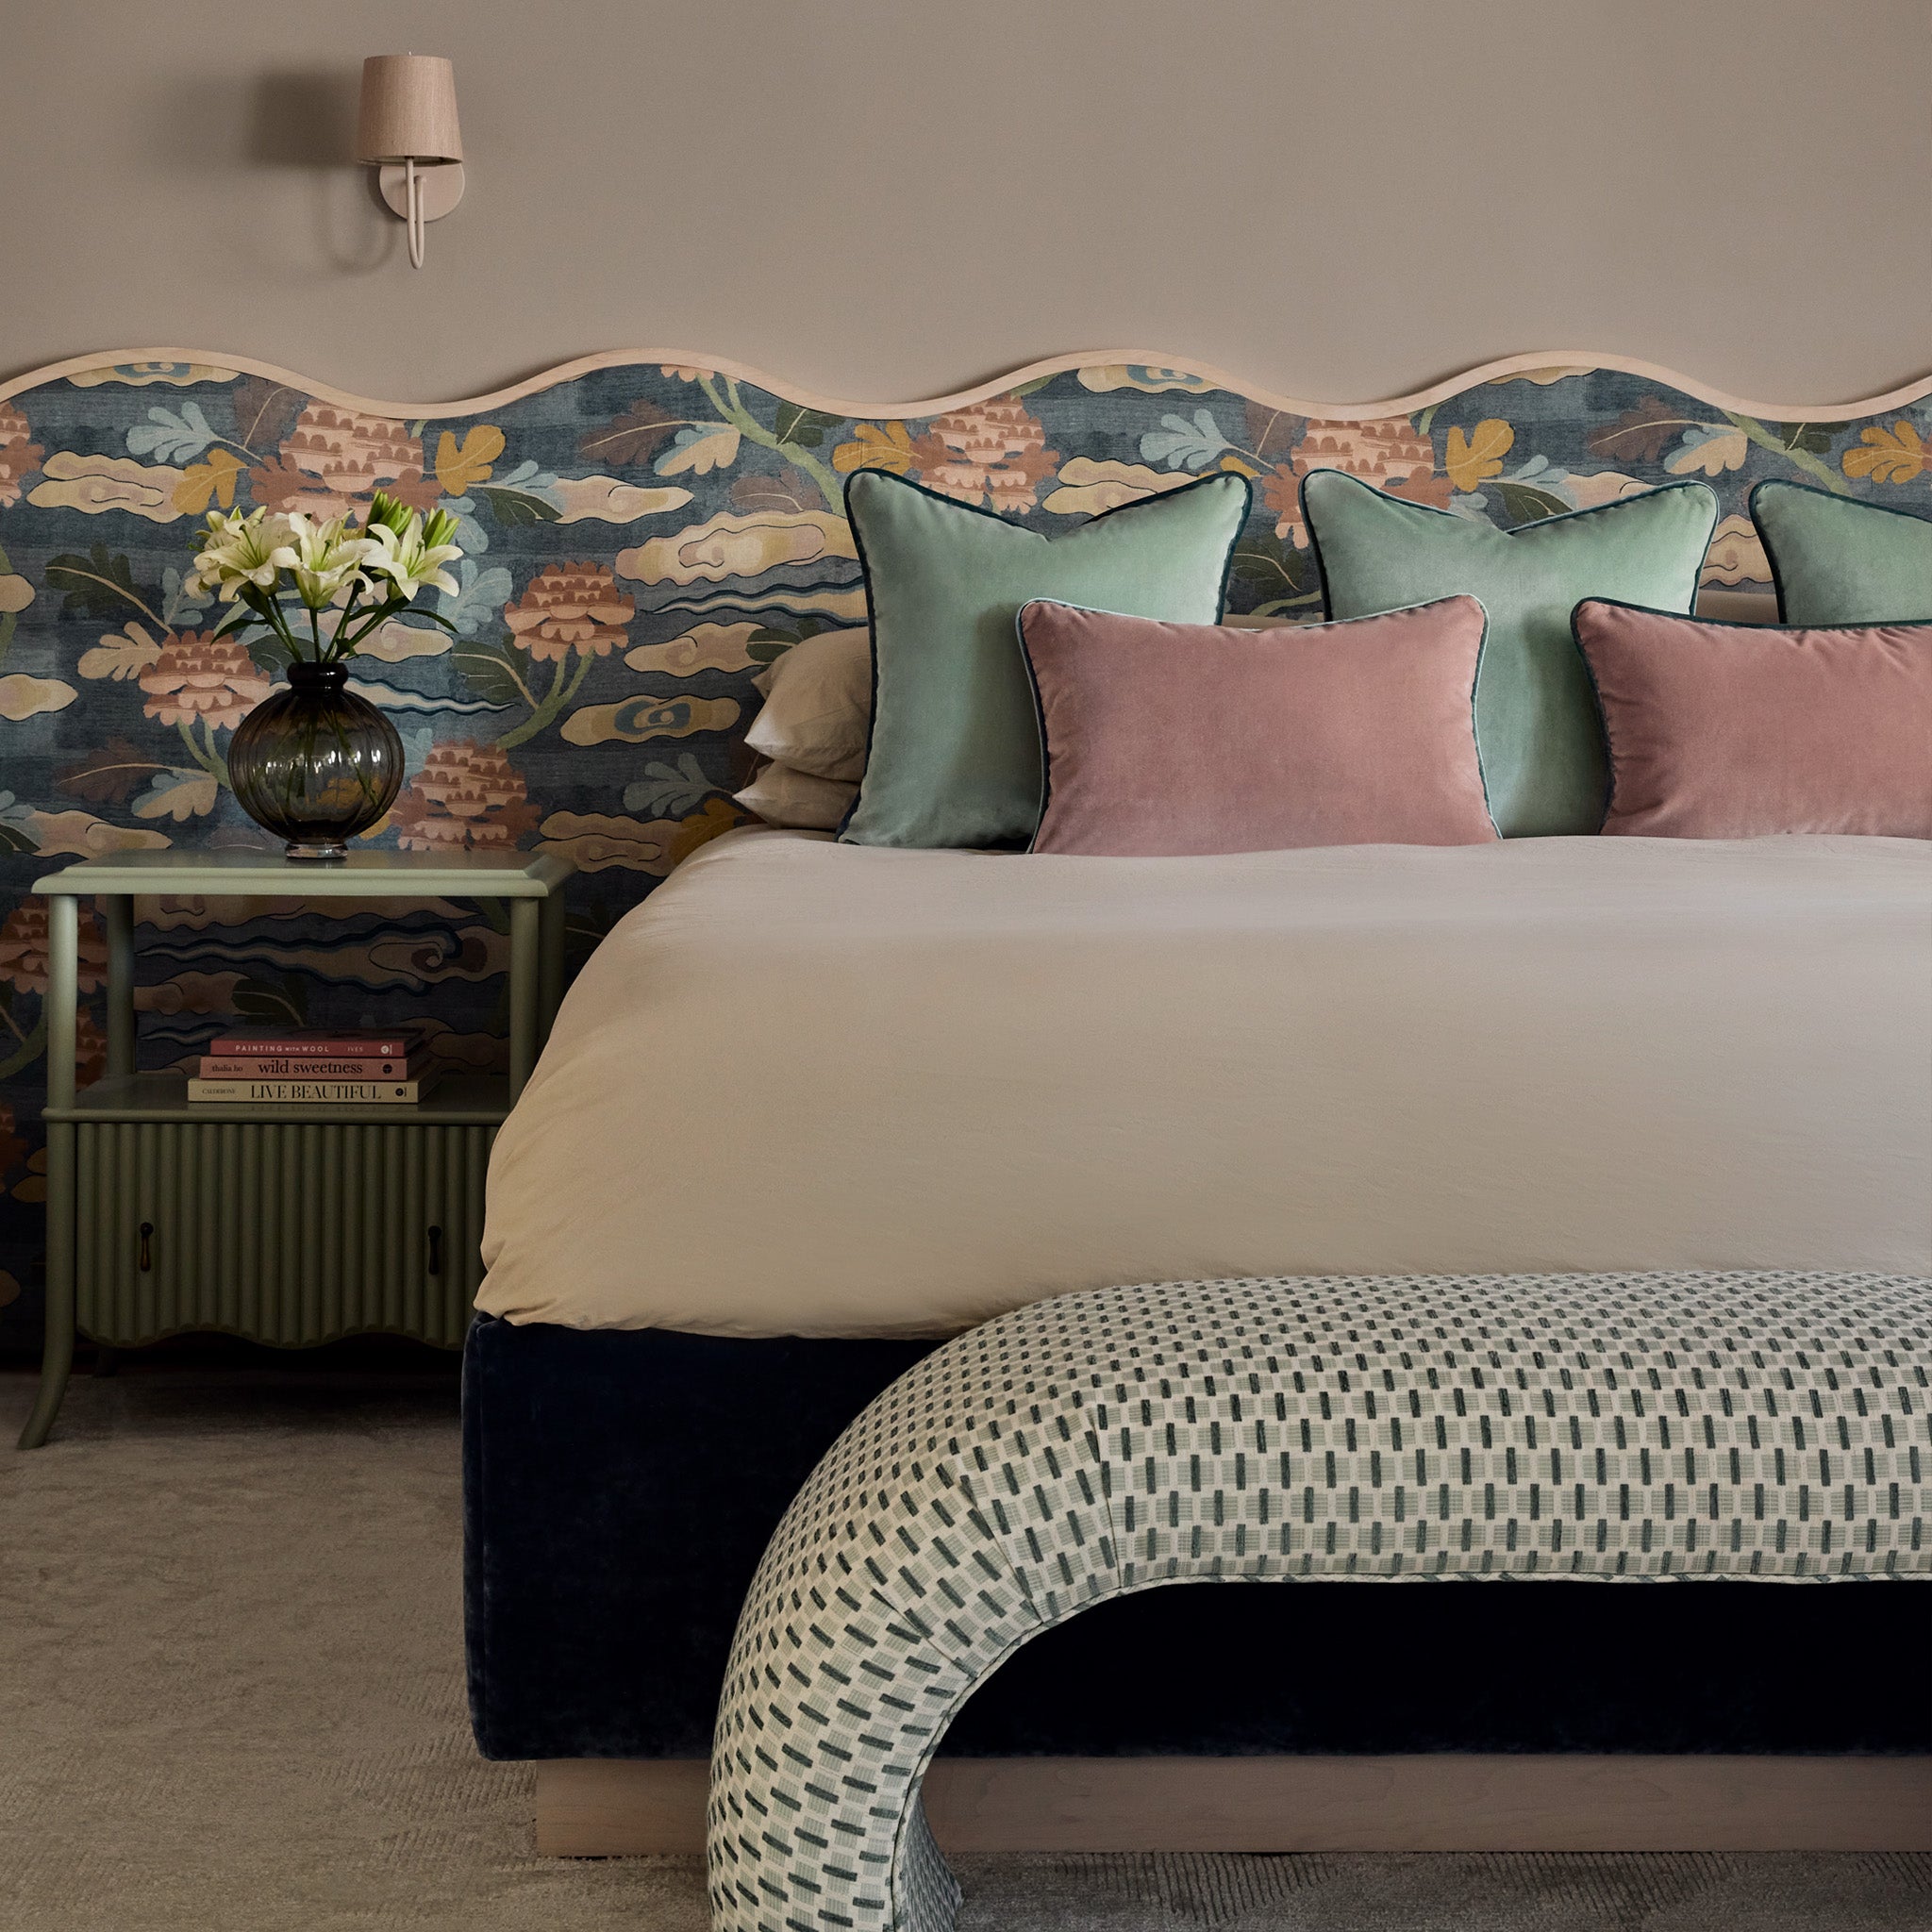 blue green velvet pillow and pink velvet pillows on a bed with white bedding and a green night table with a clear vase of flowers on it and a mint green geometric print bench at the end of the bed